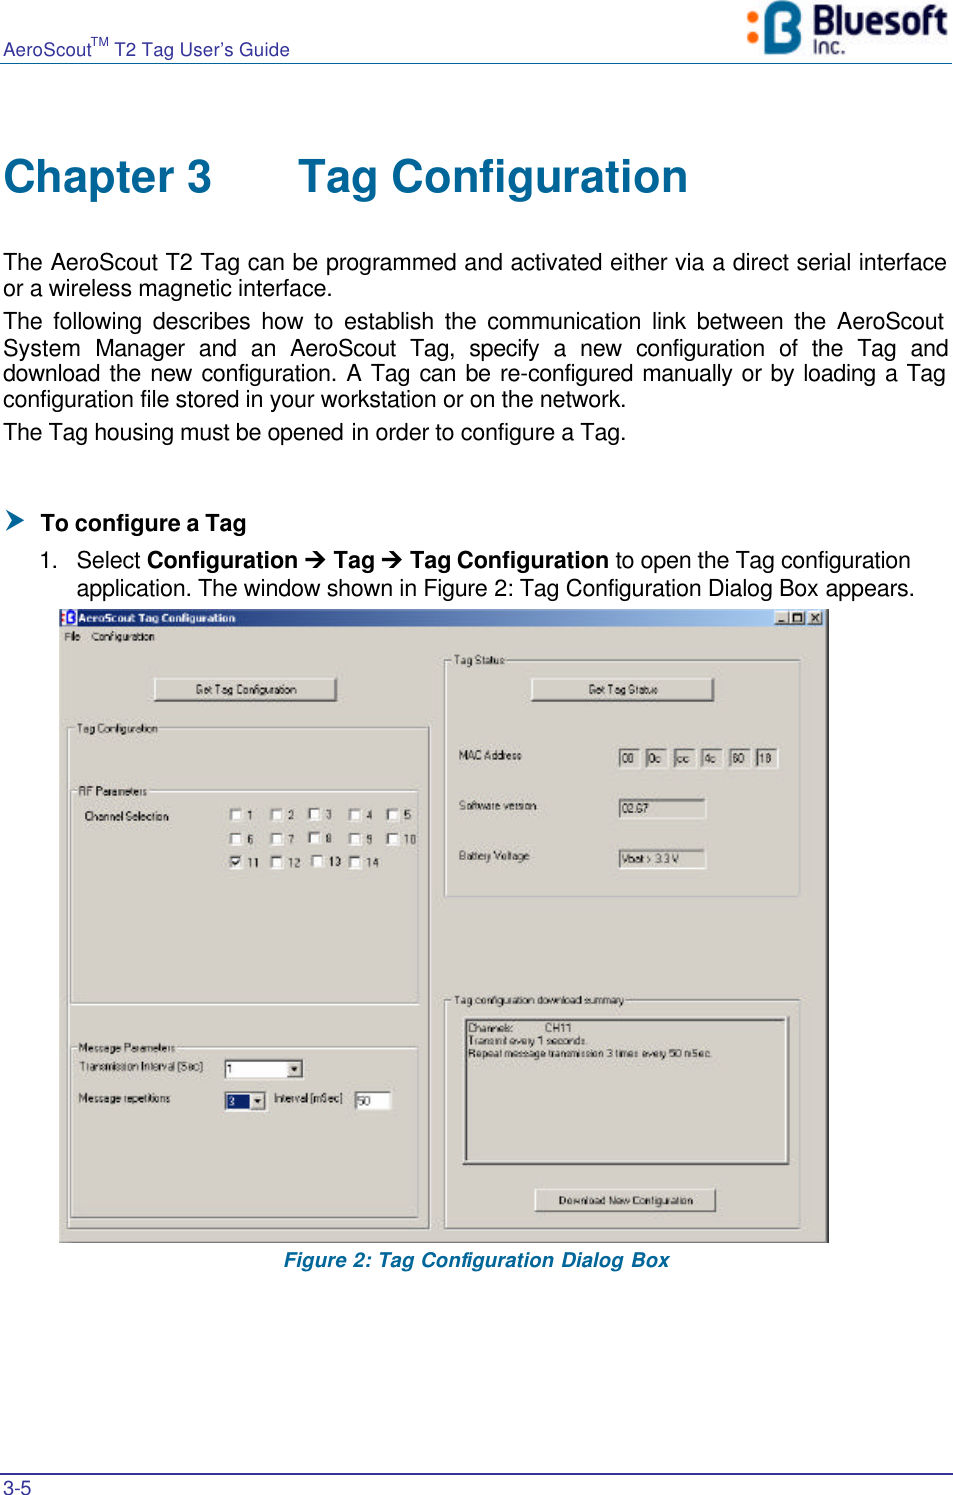 AeroScoutTM T2 Tag User’s Guide    3-5   Chapter 3 Tag Configuration  The AeroScout T2 Tag can be programmed and activated either via a direct serial interface or a wireless magnetic interface.  The following describes how to establish the communication link between the AeroScout System  Manager and an AeroScout Tag, specify a new configuration of the Tag and download the new configuration. A Tag can be re-configured manually or by loading a Tag configuration file stored in your workstation or on the network. The Tag housing must be opened in order to configure a Tag.  † To configure a Tag 1. Select Configuration Ú Tag Ú Tag Configuration to open the Tag configuration application. The window shown in Figure 2: Tag Configuration Dialog Box appears.  Figure 2: Tag Configuration Dialog Box 